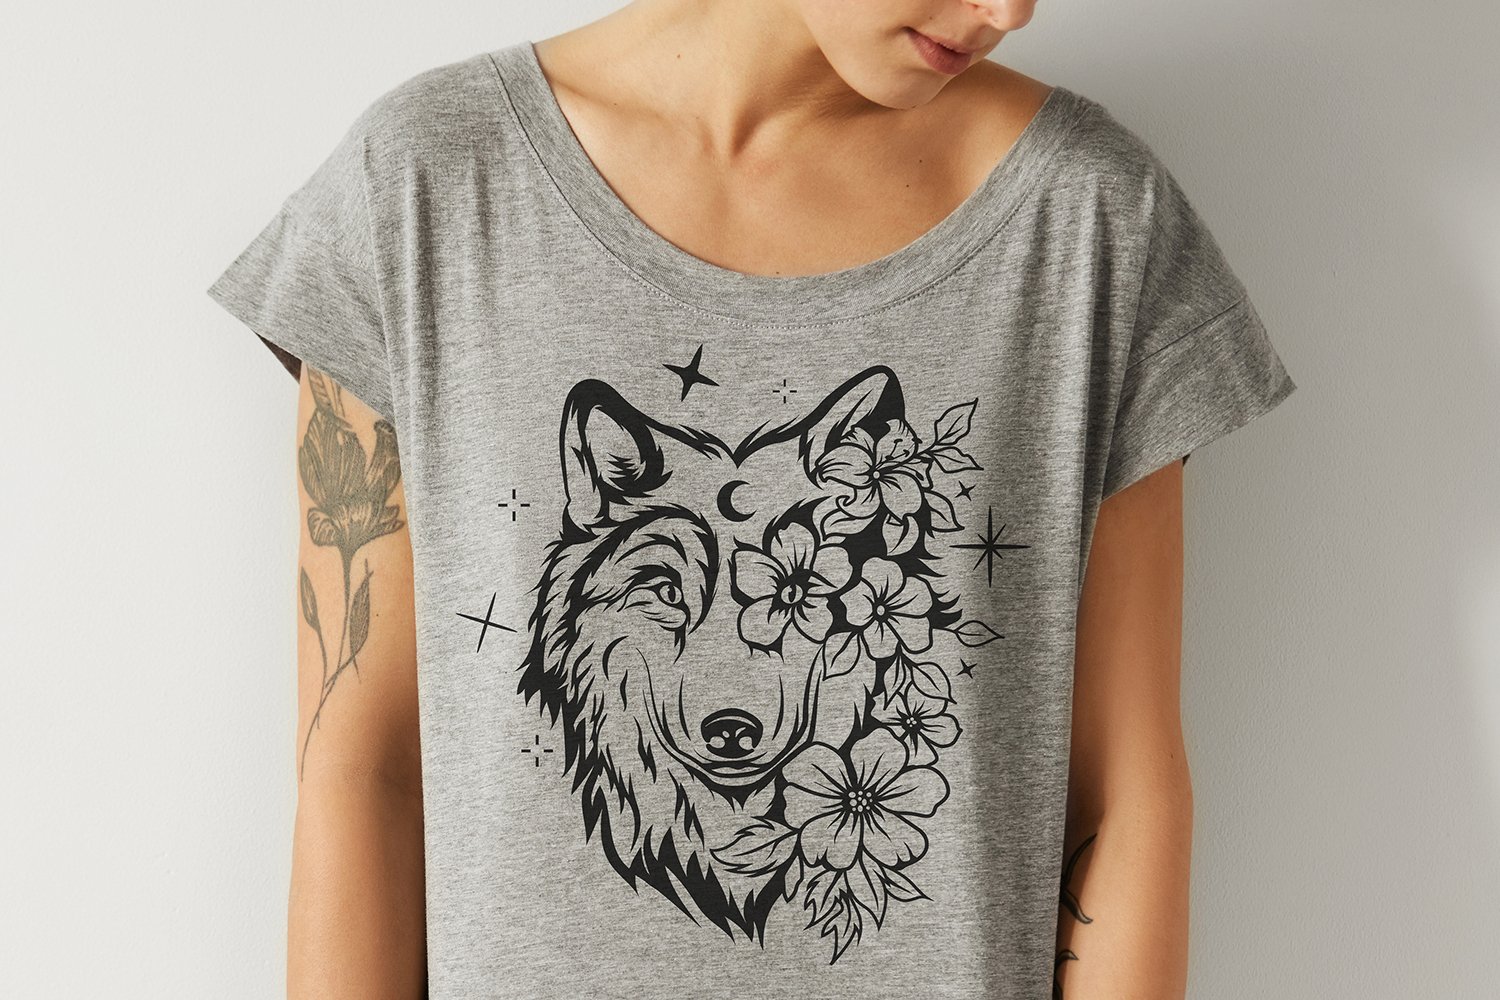 Woman wearing a grey shirt with a wolf and flowers on it.